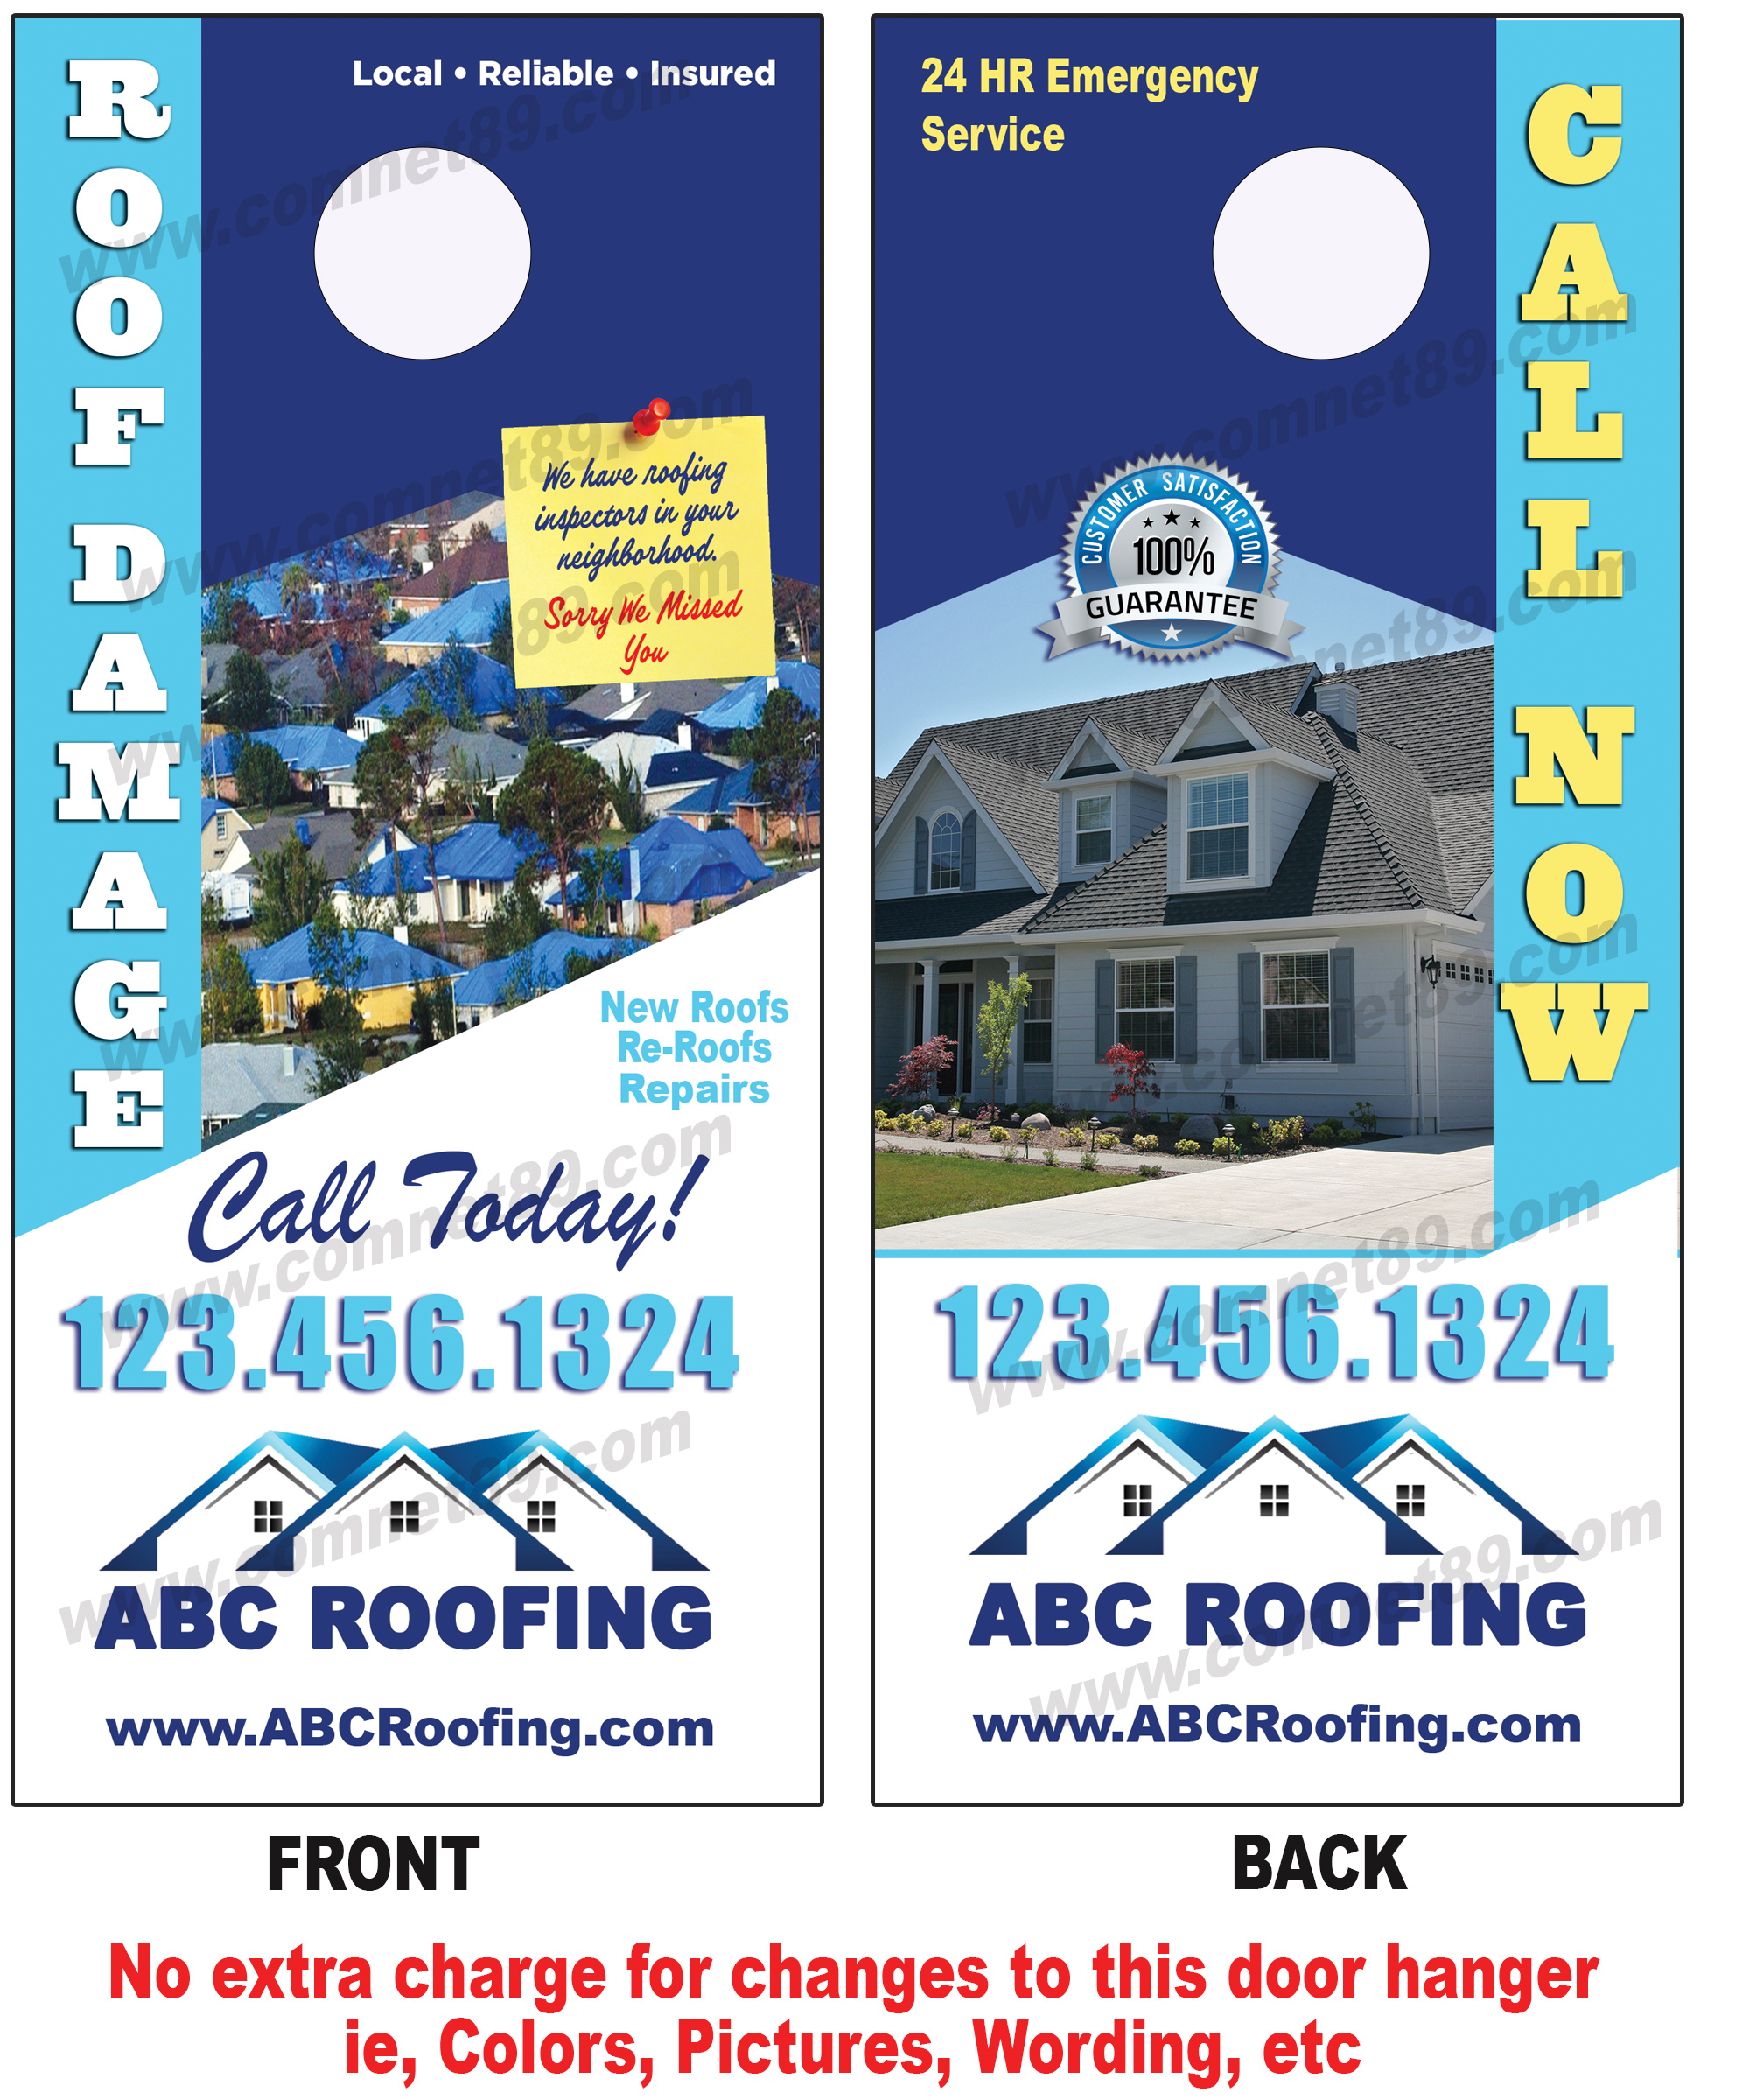 Deliver this roofing door hanger to property owners who have experienced storm damage.